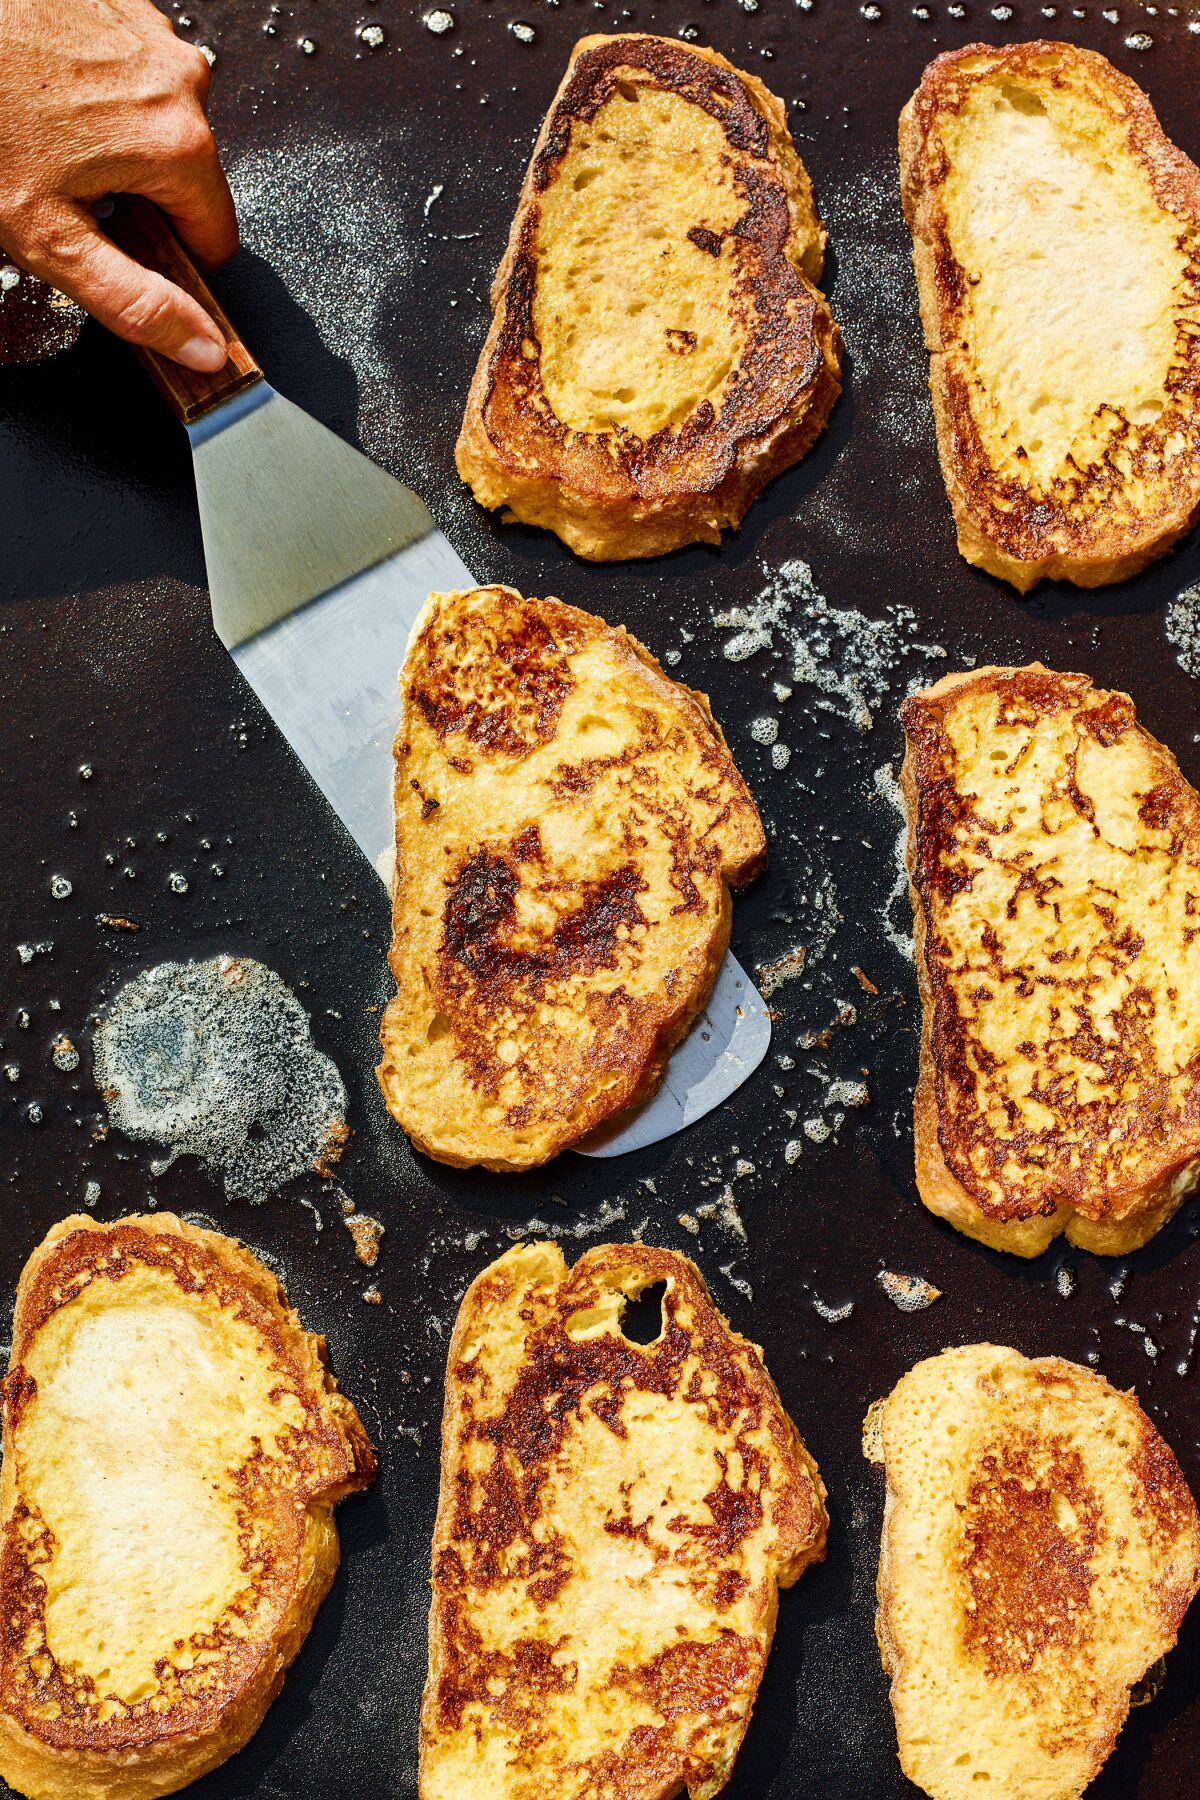 French toast cooks on a flattop outdoor griddle.